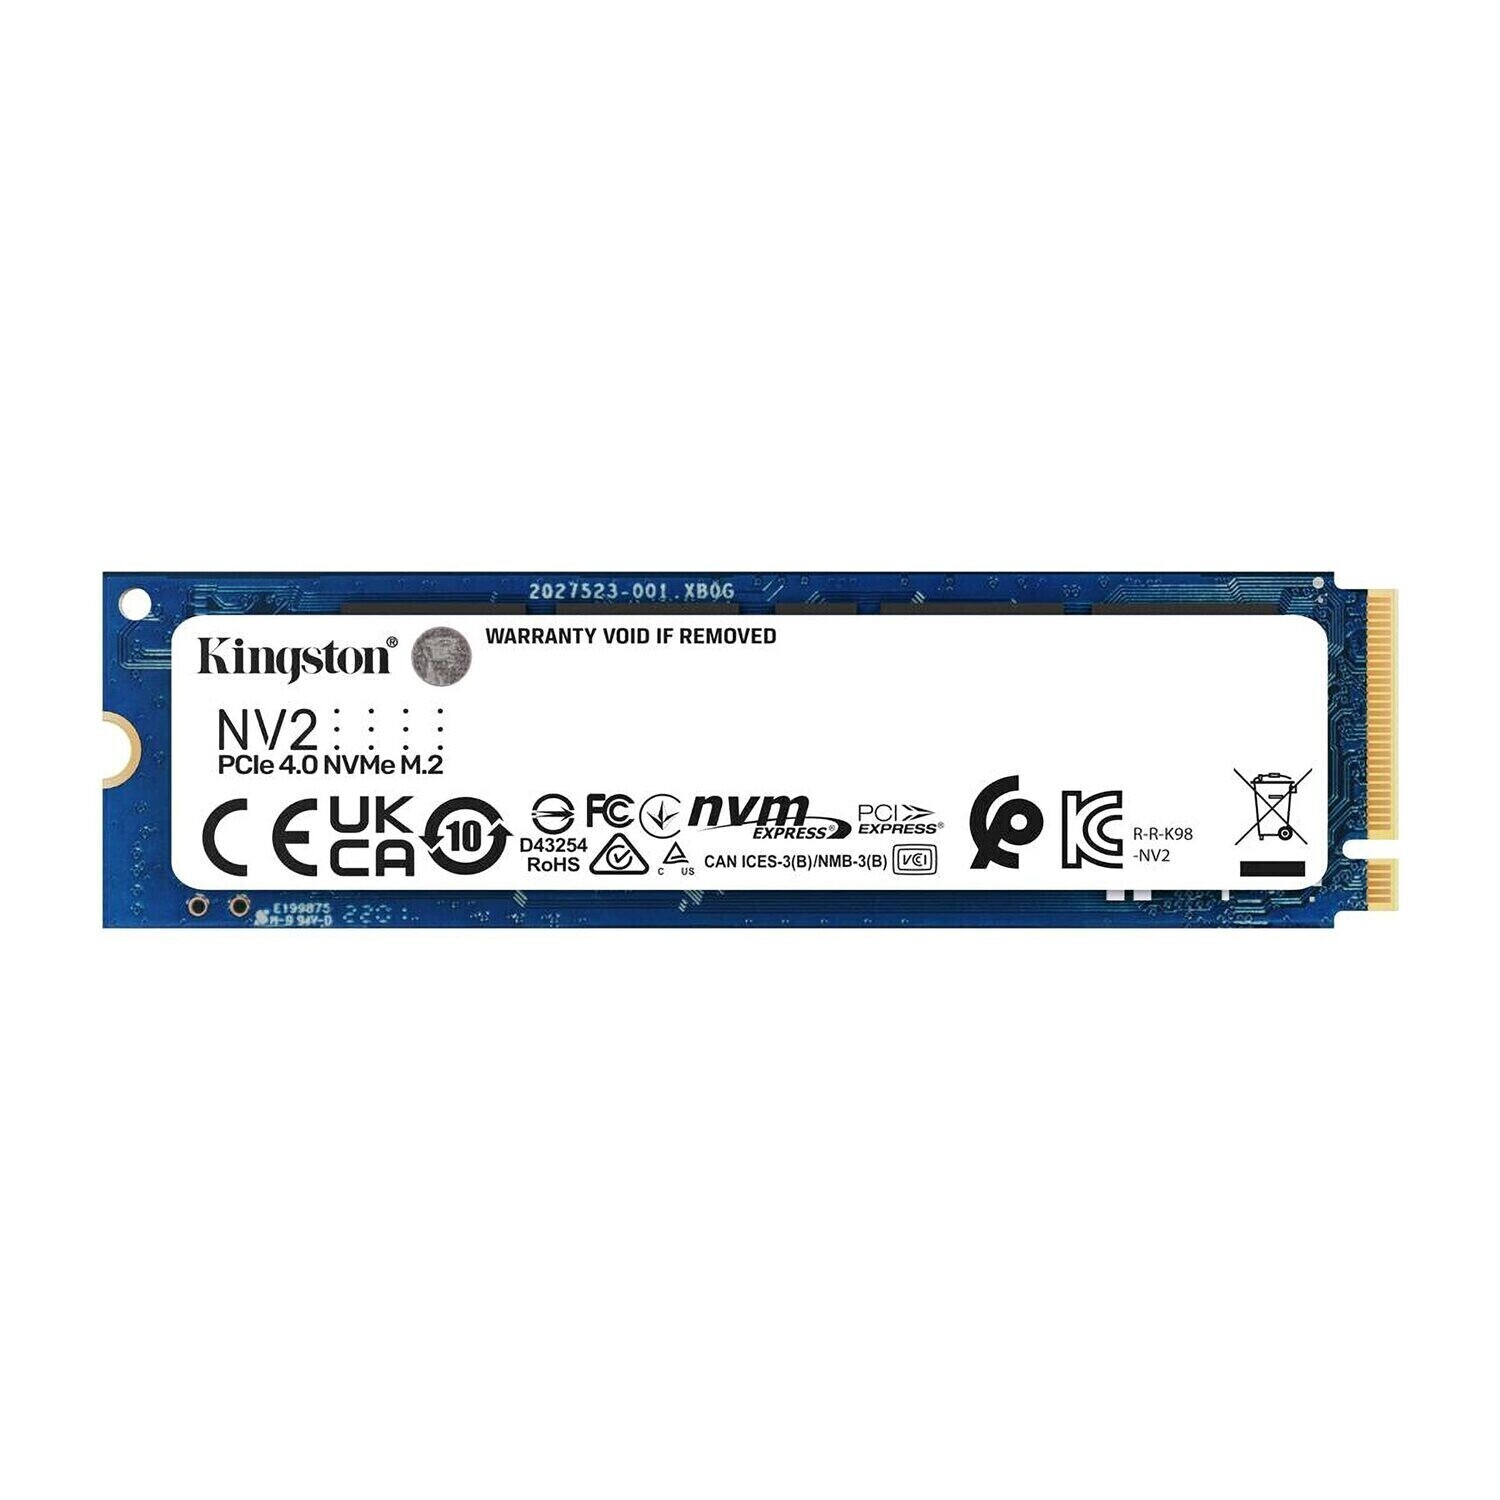 Kingston 250GB NV2 M.2 2280 PCIe 4.0 NVMe SSD, up to 3000/1300MB/s